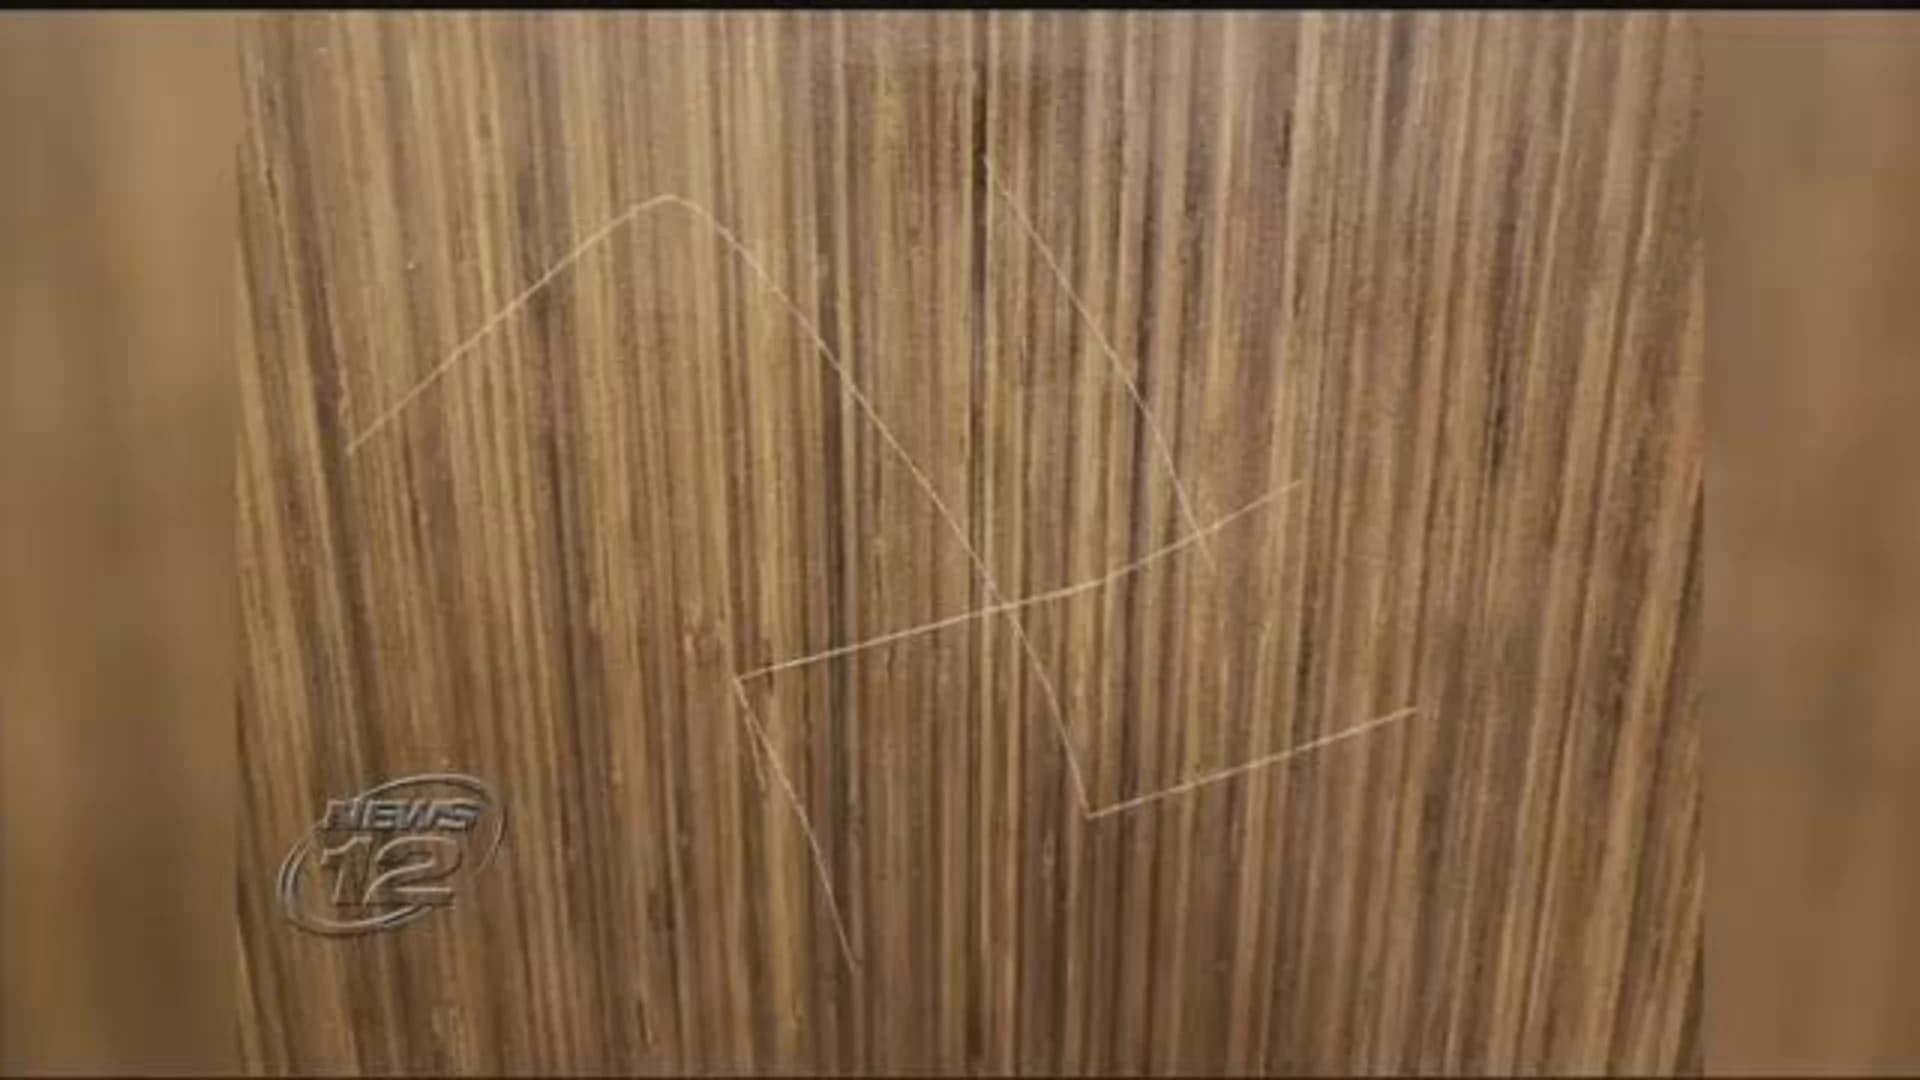 “Shocking and disgusting"- Outrage in Nyack after swastikas found at Starbucks